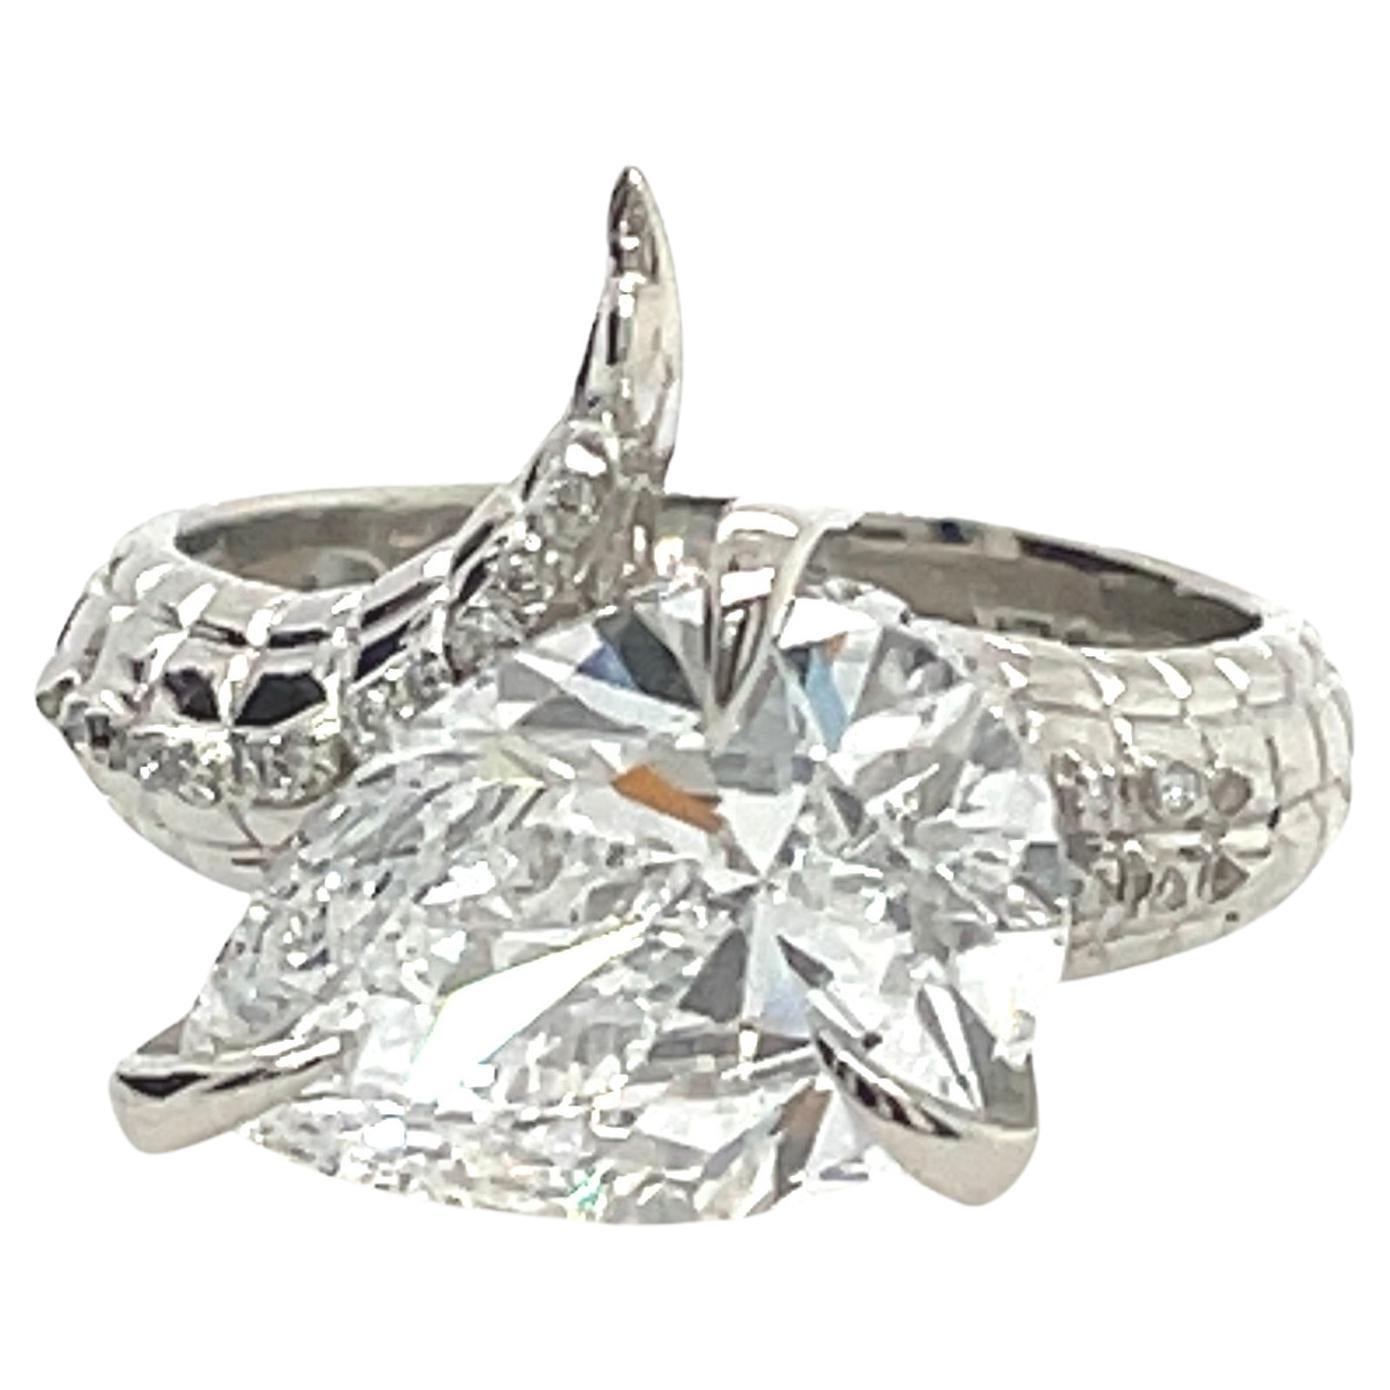 For Sale:  4ct Diamond Croc Dragon Tail Ring in platinum and white diamonds  2